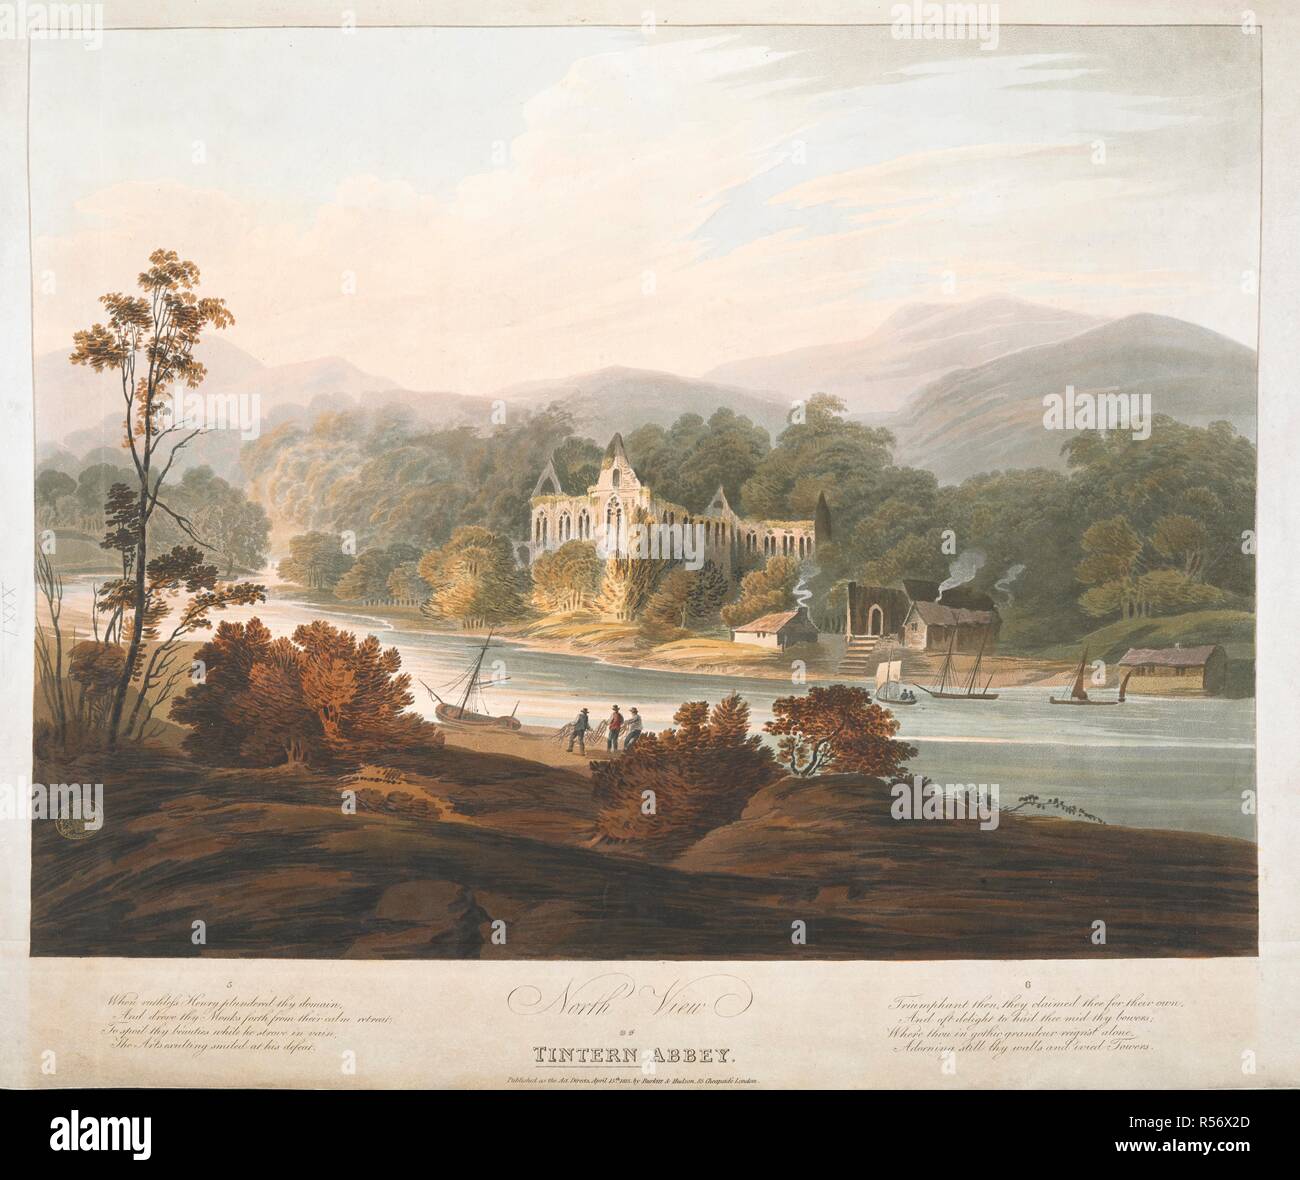 North View of Tintern Abbey. A ruined abbey in the middle ground; a river in front; boats on the water; fishermen on the shore; small houses near the abbey; trees and foliage throughout the scene; mountains in the distance. Two verses of a poem on either side of the title.  . Four Views of Tintern Abbey, by Calbert, 1815. [London] : Published as the Act Directs April 15th 1815 by Burkitt & Hudson, 85 Cheapside, London. 1 print : aquatint and etching with hand-colouring ; sheet 50.5 x 60.7 cm. Source: Maps.K.Top.31.16.k.3. Author: Calvert, Frederick. Stock Photo